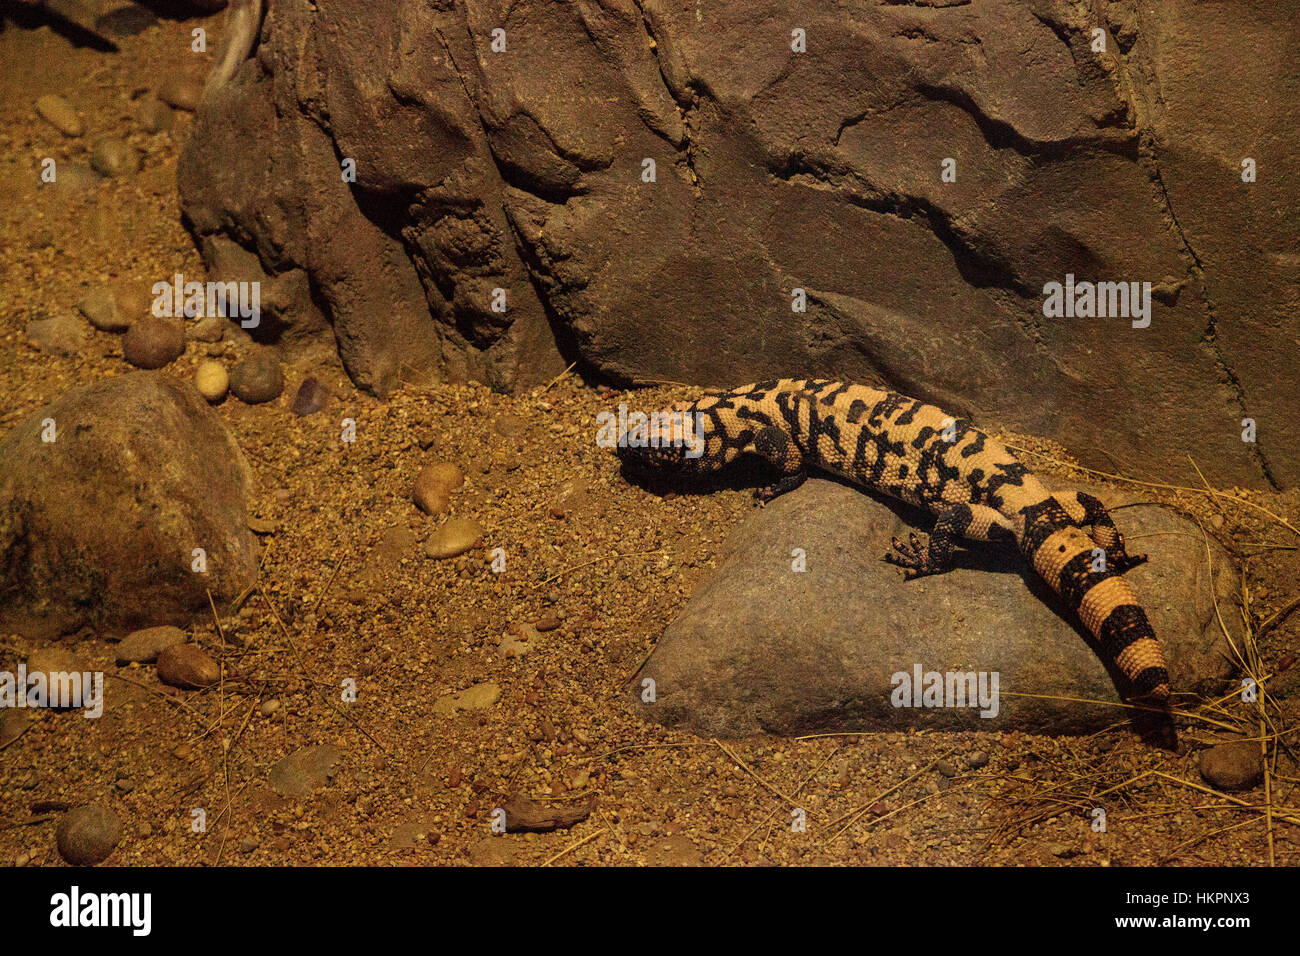 Gila monster, Heloderma suspectum, crawling over rocks in a desert environment. Stock Photo